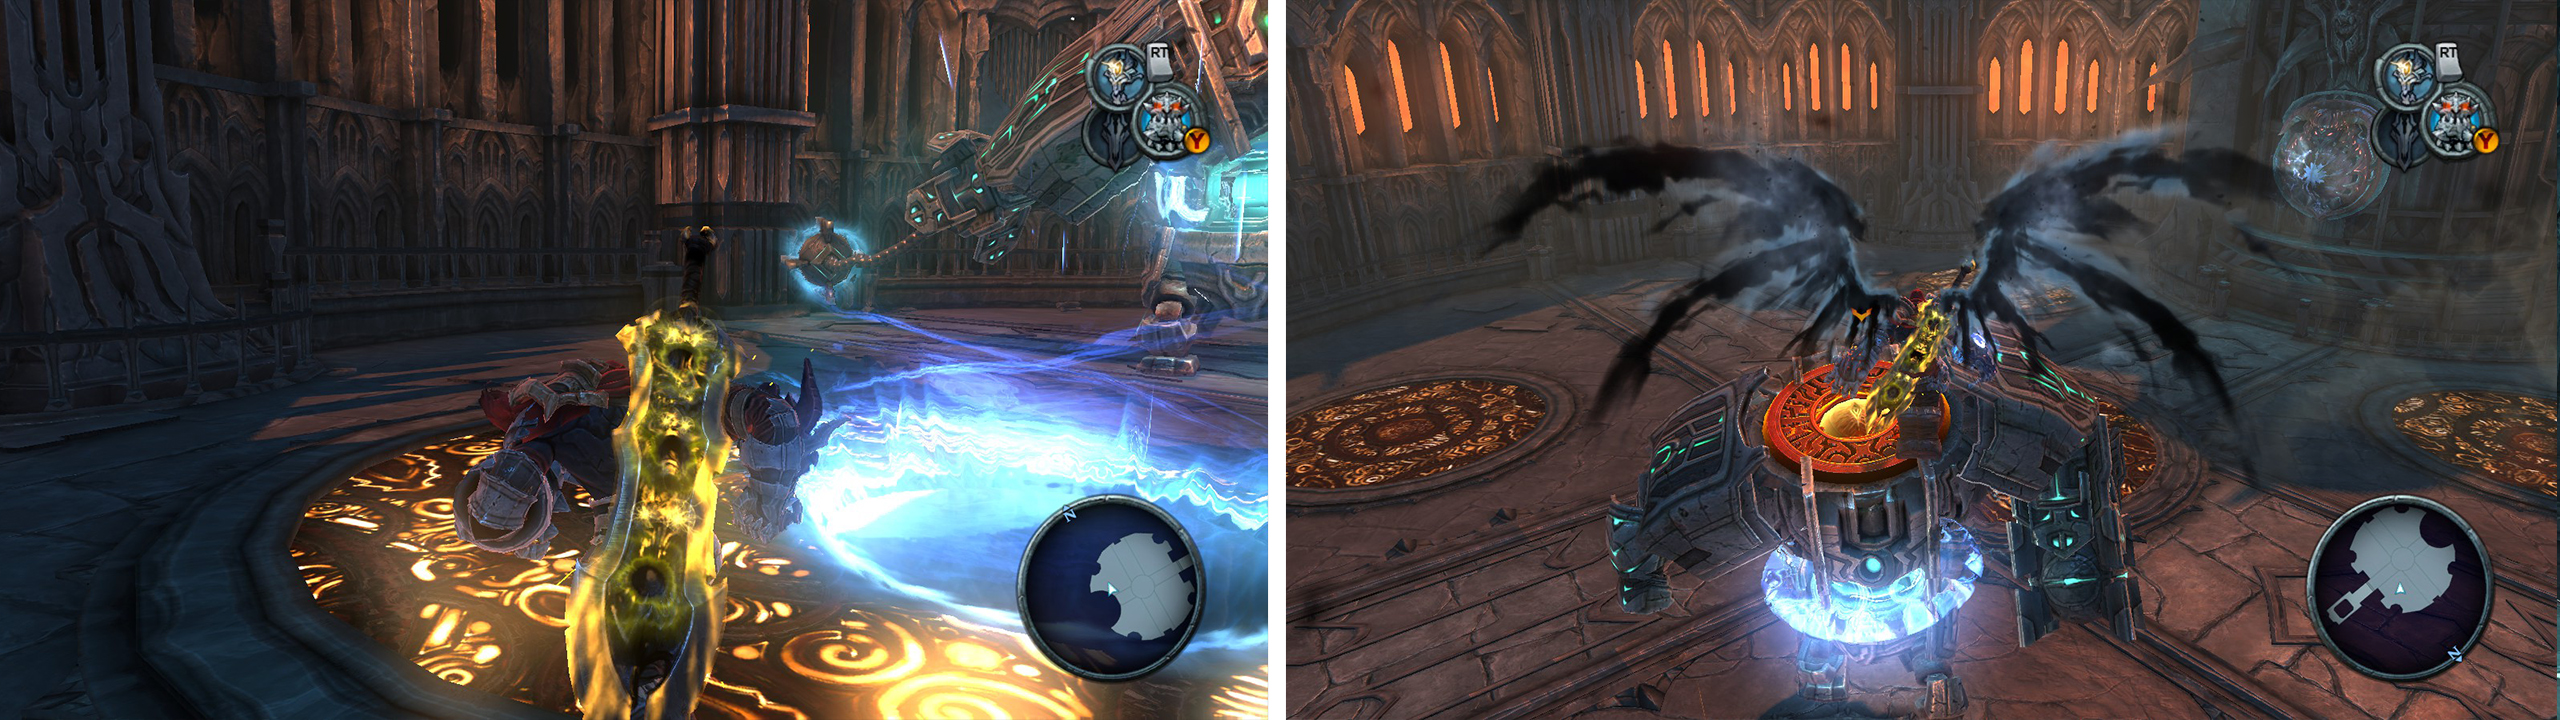 Use the portal pads on the floor (left) to launch yourself and land on the boss’s head (right).